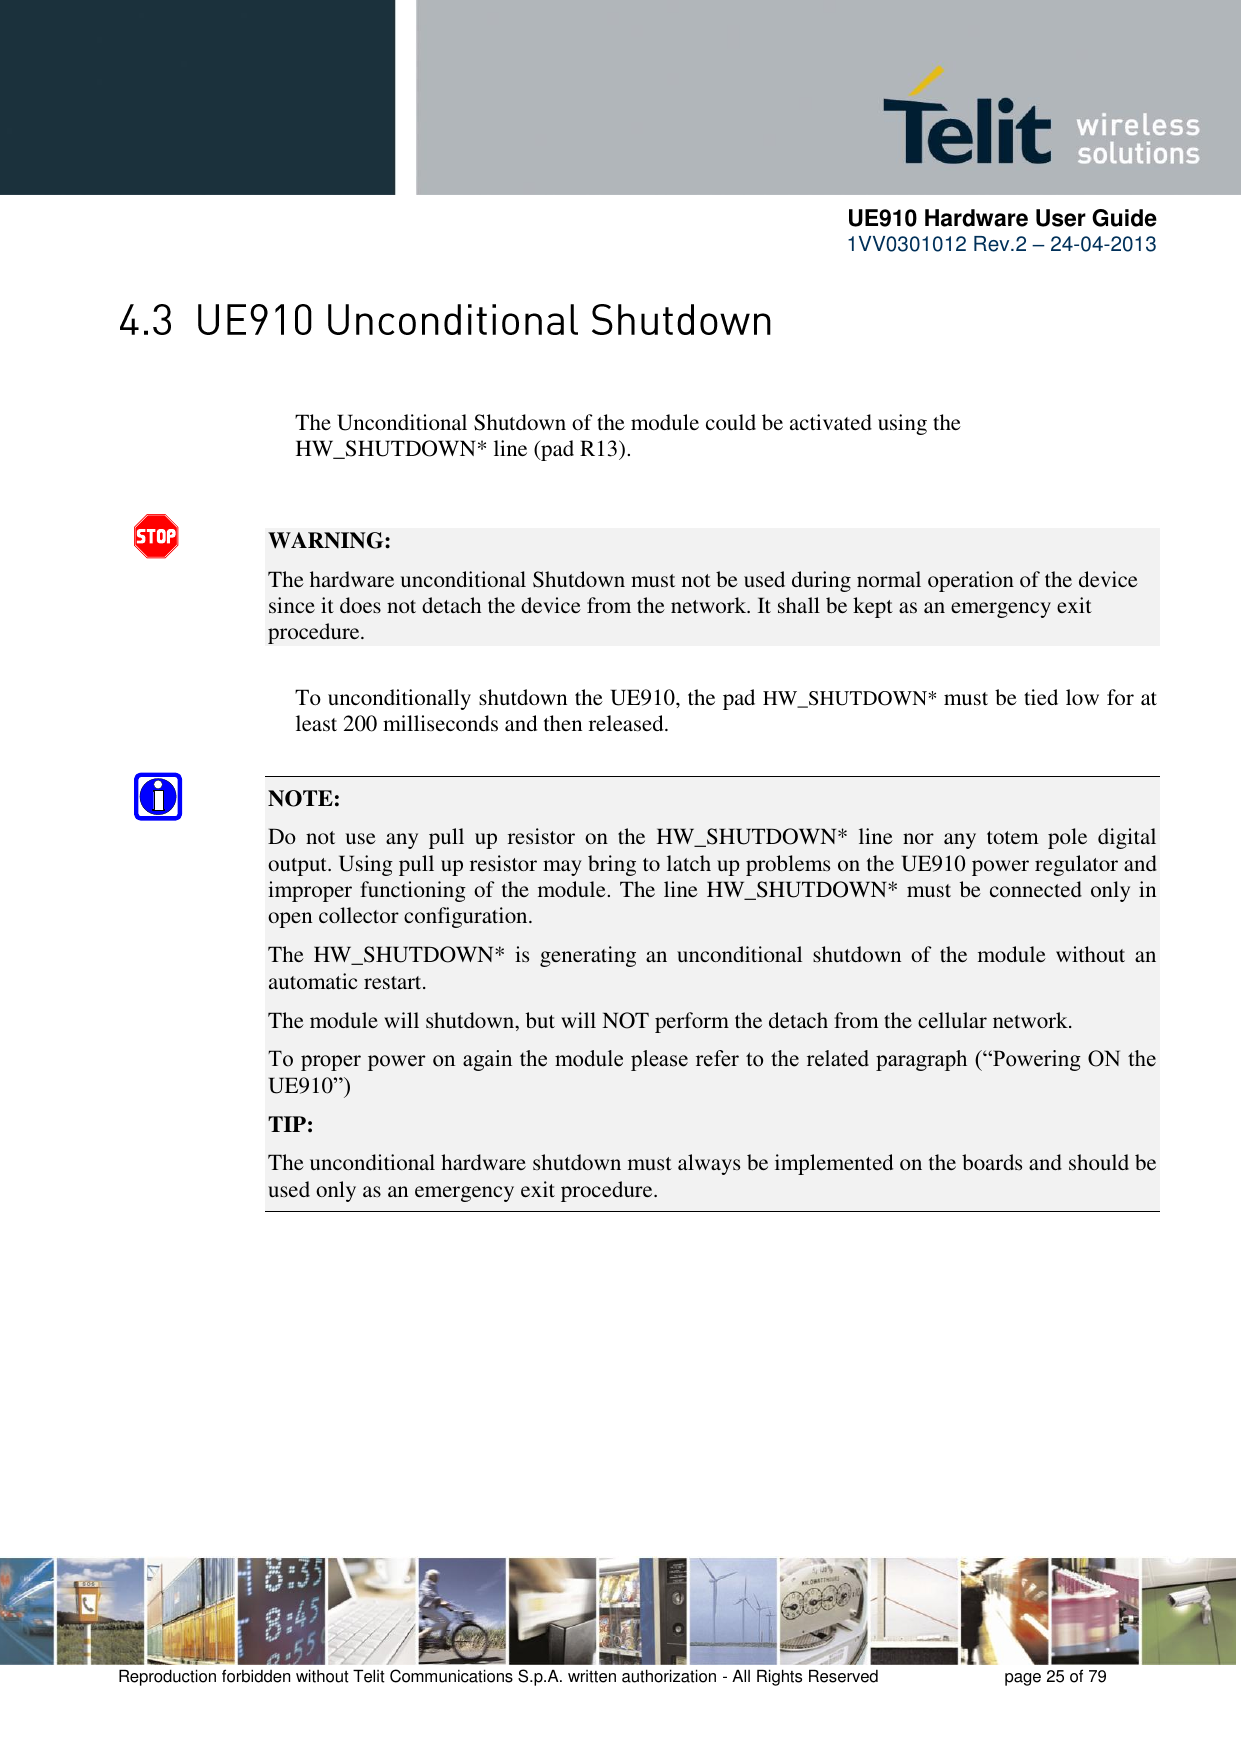      UE910 Hardware User Guide  1VV0301012 Rev.2 – 24-04-2013    Reproduction forbidden without Telit Communications S.p.A. written authorization - All Rights Reserved    page 25 of 79        The Unconditional Shutdown of the module could be activated using the        HW_SHUTDOWN* line (pad R13).   WARNING: The hardware unconditional Shutdown must not be used during normal operation of the device since it does not detach the device from the network. It shall be kept as an emergency exit procedure.      To unconditionally shutdown the UE910, the pad HW_SHUTDOWN* must be tied low for at     least 200 milliseconds and then released.  NOTE:  Do  not  use  any  pull  up  resistor  on  the  HW_SHUTDOWN*  line  nor  any  totem  pole  digital output. Using pull up resistor may bring to latch up problems on the UE910 power regulator and improper functioning of the module. The line HW_SHUTDOWN* must be connected only in open collector configuration. The  HW_SHUTDOWN*  is generating  an unconditional shutdown of the  module  without an automatic restart. The module will shutdown, but will NOT perform the detach from the cellular network. To proper power on again the module please refer to the related paragraph (“Powering ON the UE910”) TIP: The unconditional hardware shutdown must always be implemented on the boards and should be used only as an emergency exit procedure. 